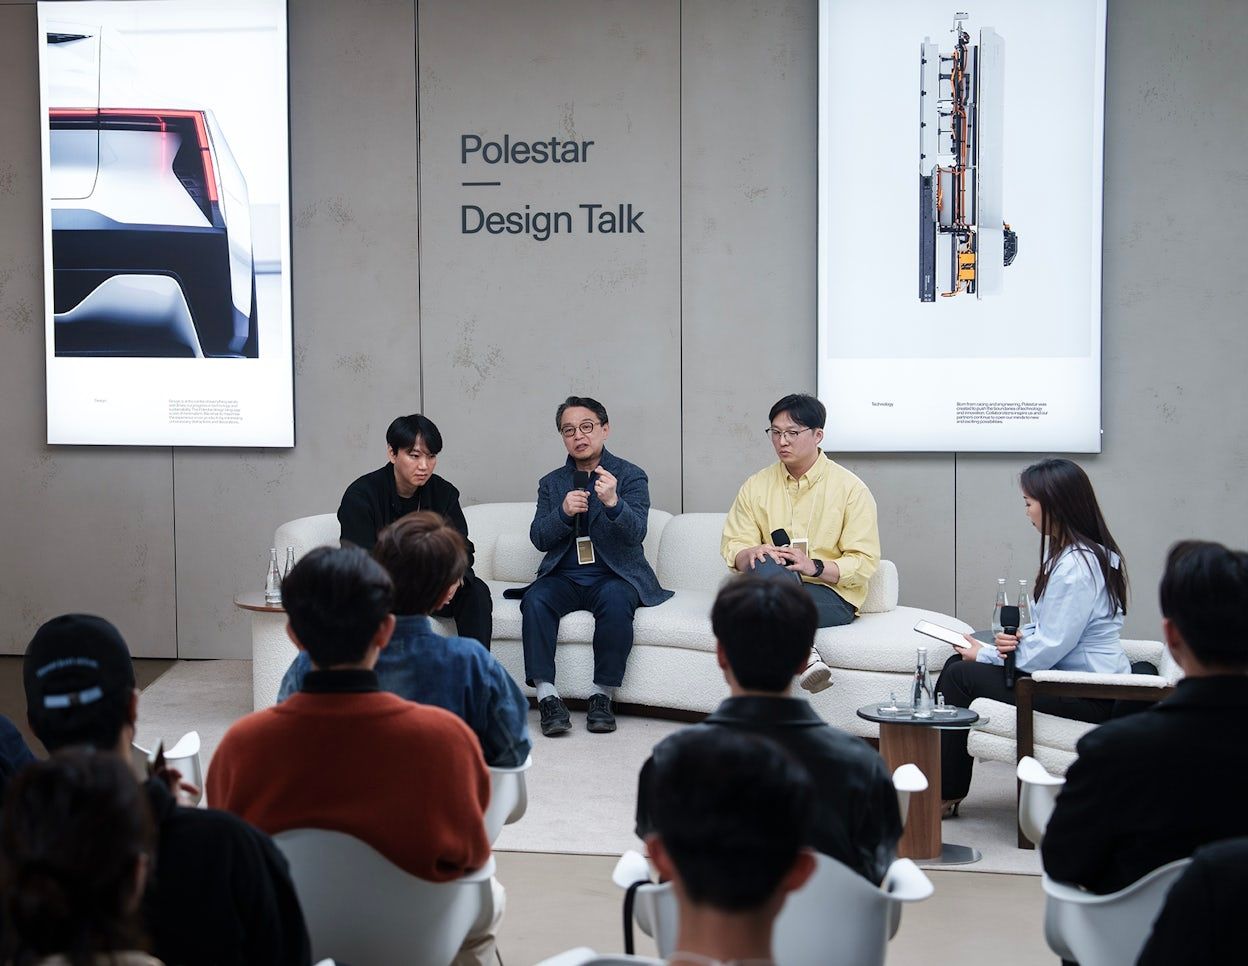 Polestar design talk, four persons talking in front of a group of people